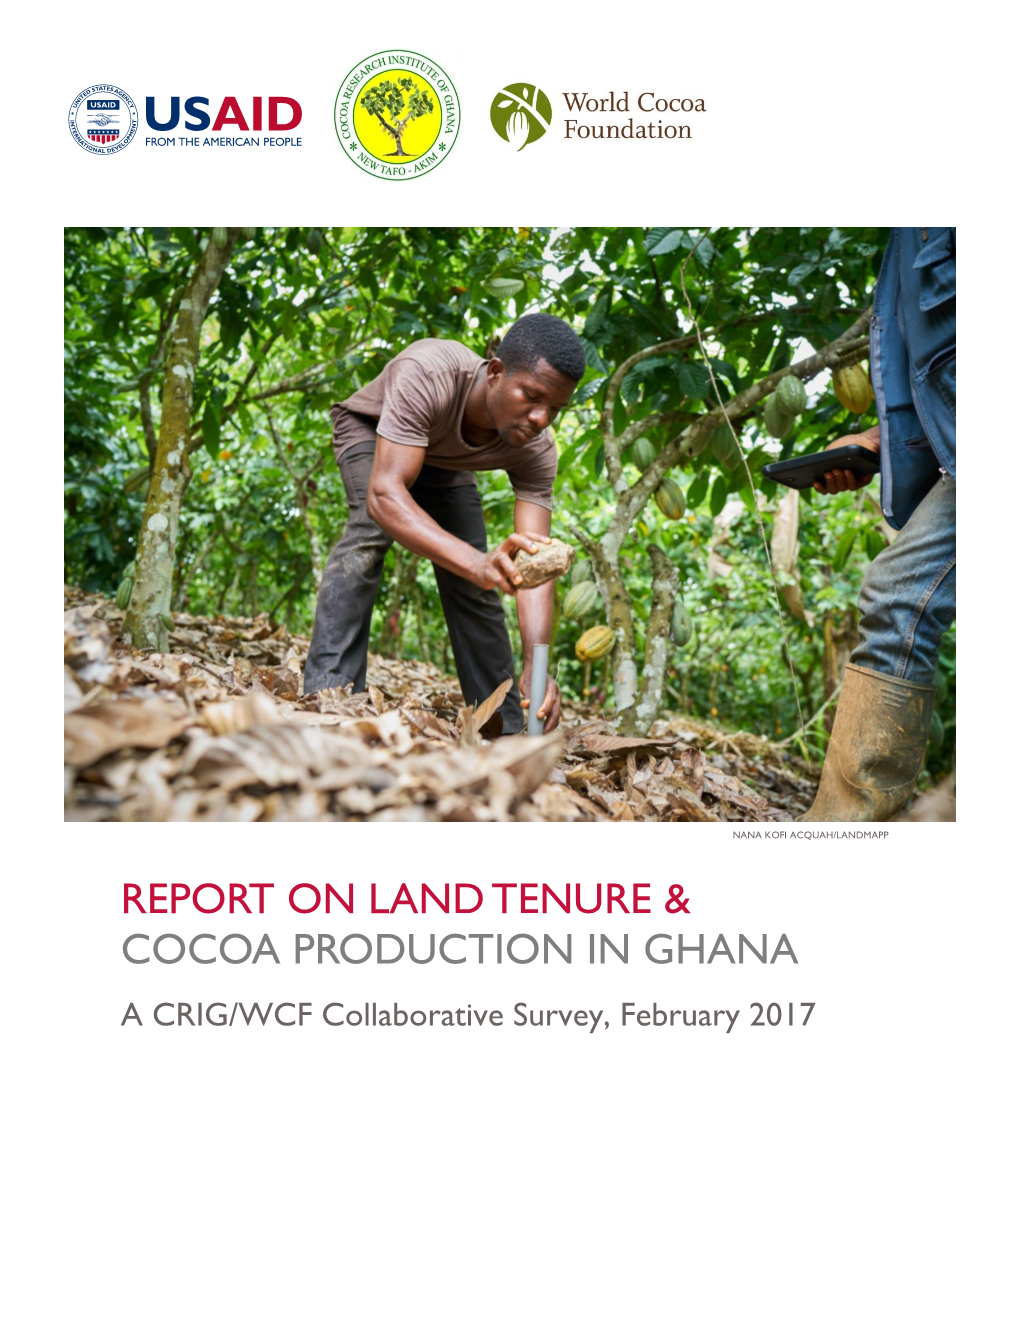 Report on Land Tenure & Cocoa Production in Ghana